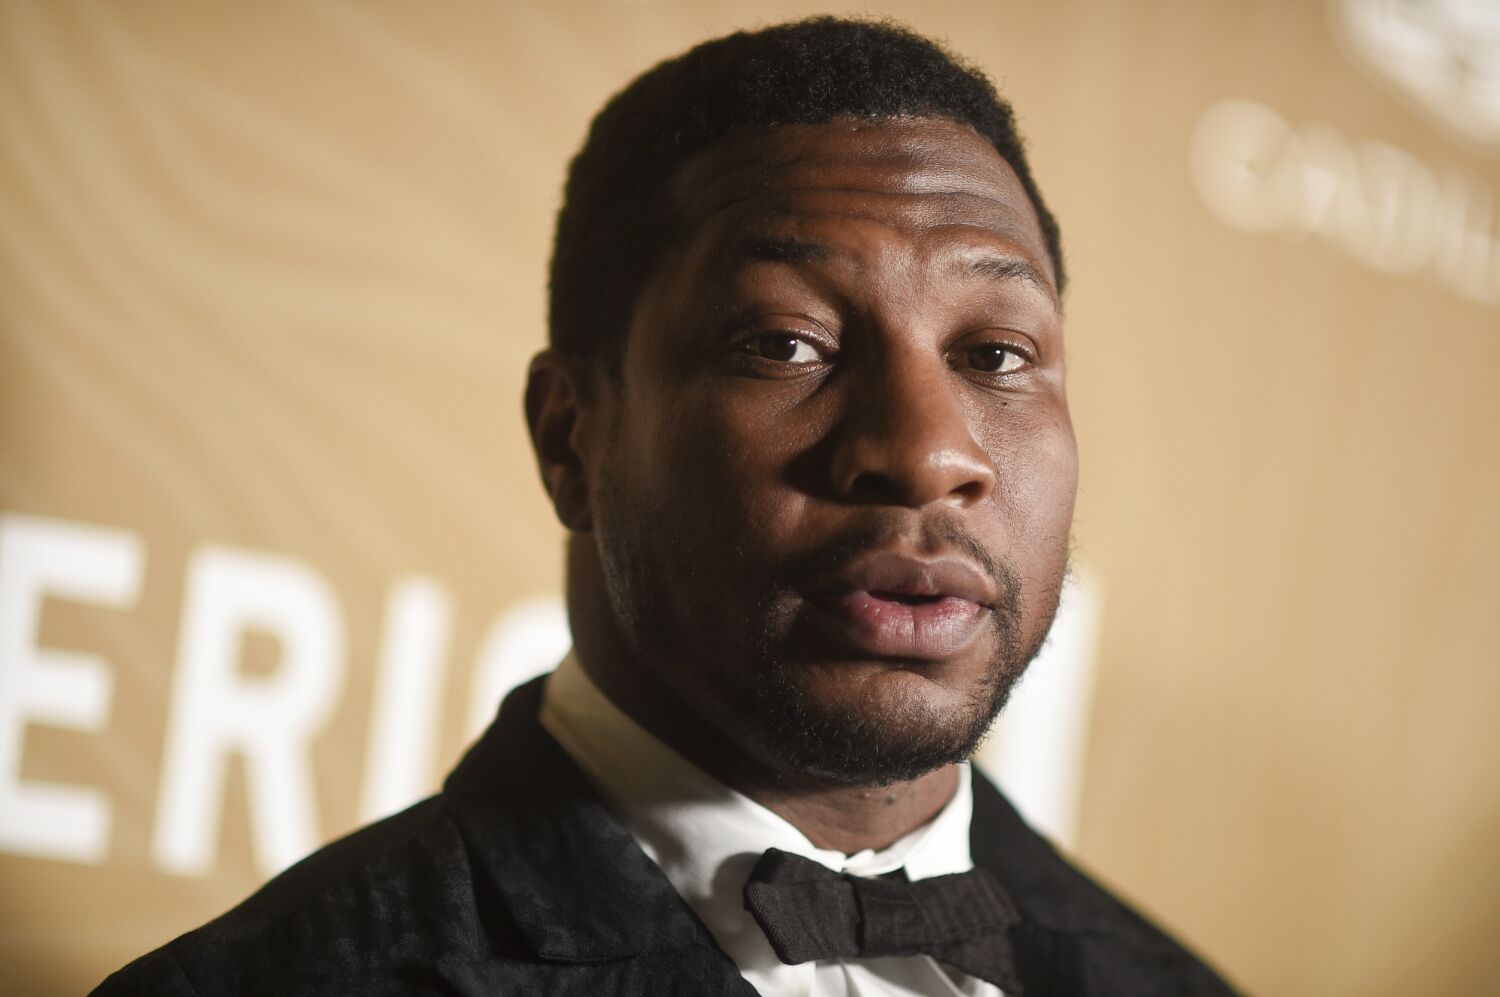 Jonathan Majors' attorney claims woman recanted assault allegations after arrest